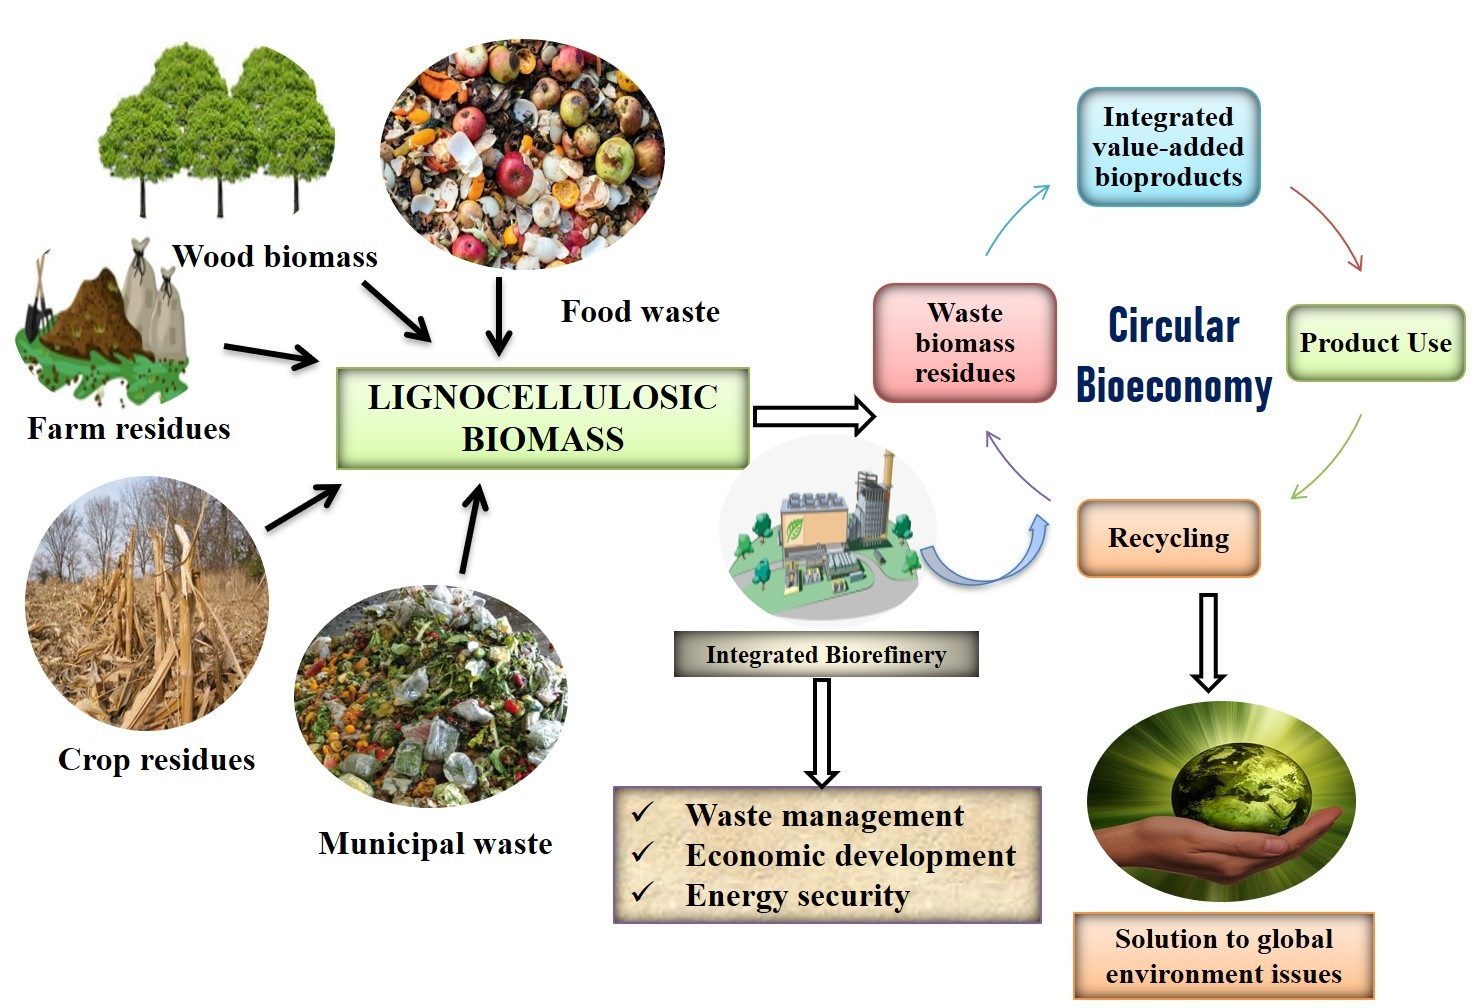 Environments | Free Full-Text | Environment Friendly Pretreatment Approaches for the Bioconversion of Lignocellulosic Biomass into Biofuels and Value-Added Products